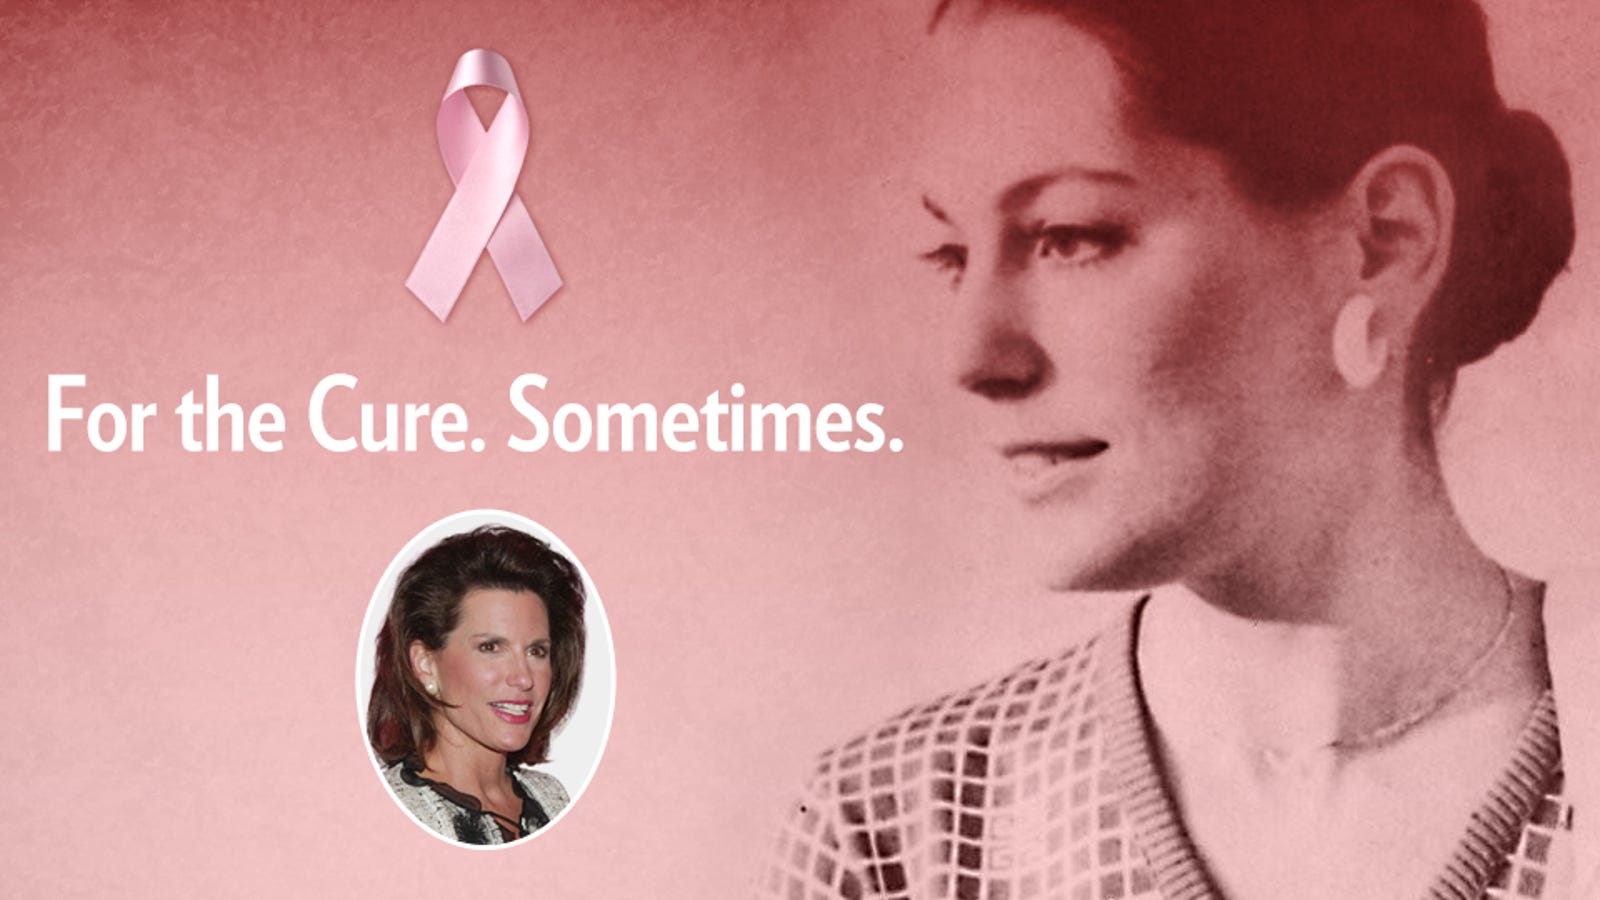 How the Susan G. Komen Foundation Lost Its Way